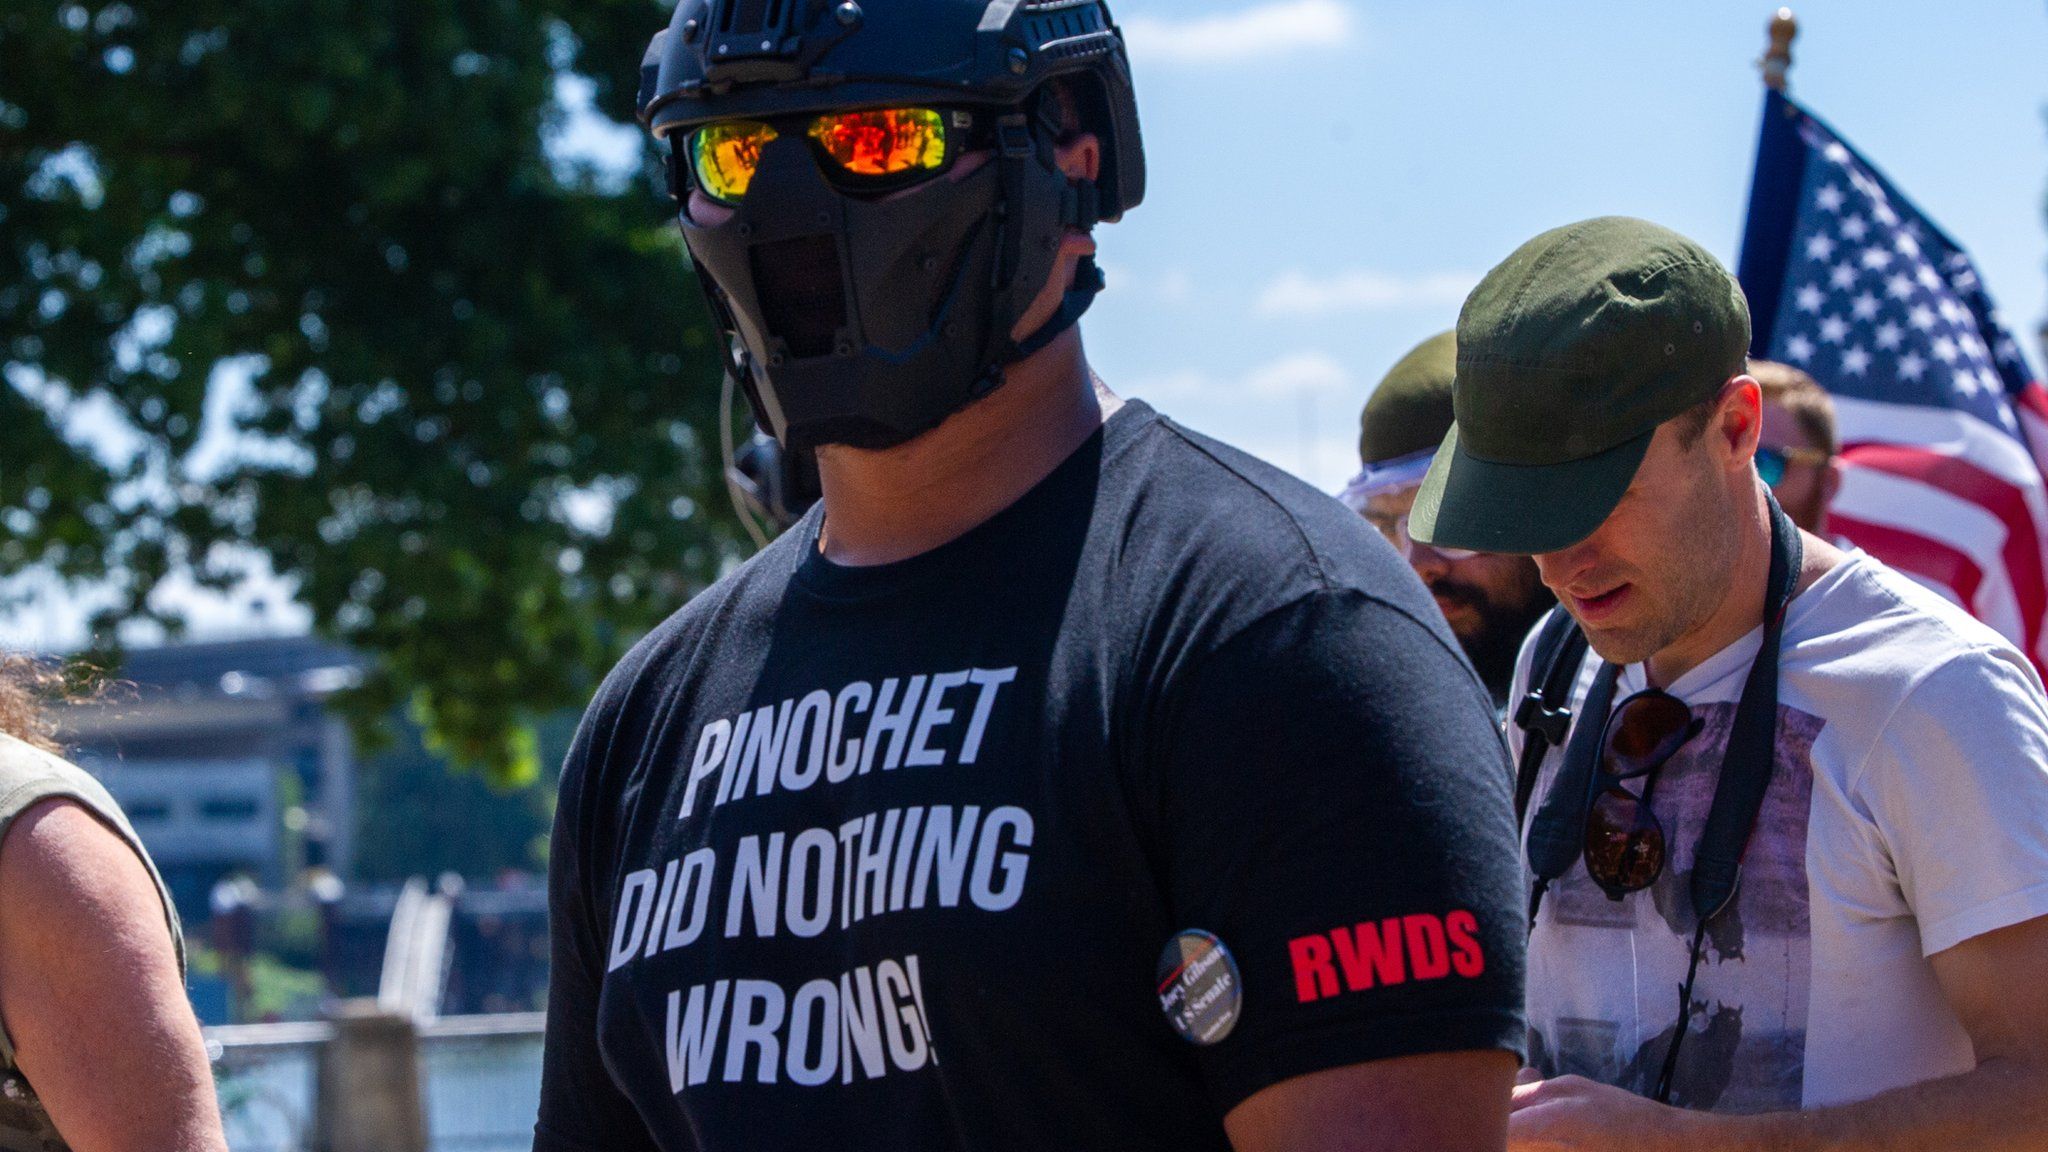 'Tiny' Toese at a Portland rally in 2018. On his shirt is 'RWDS' which stands for 'Right wing death squad'